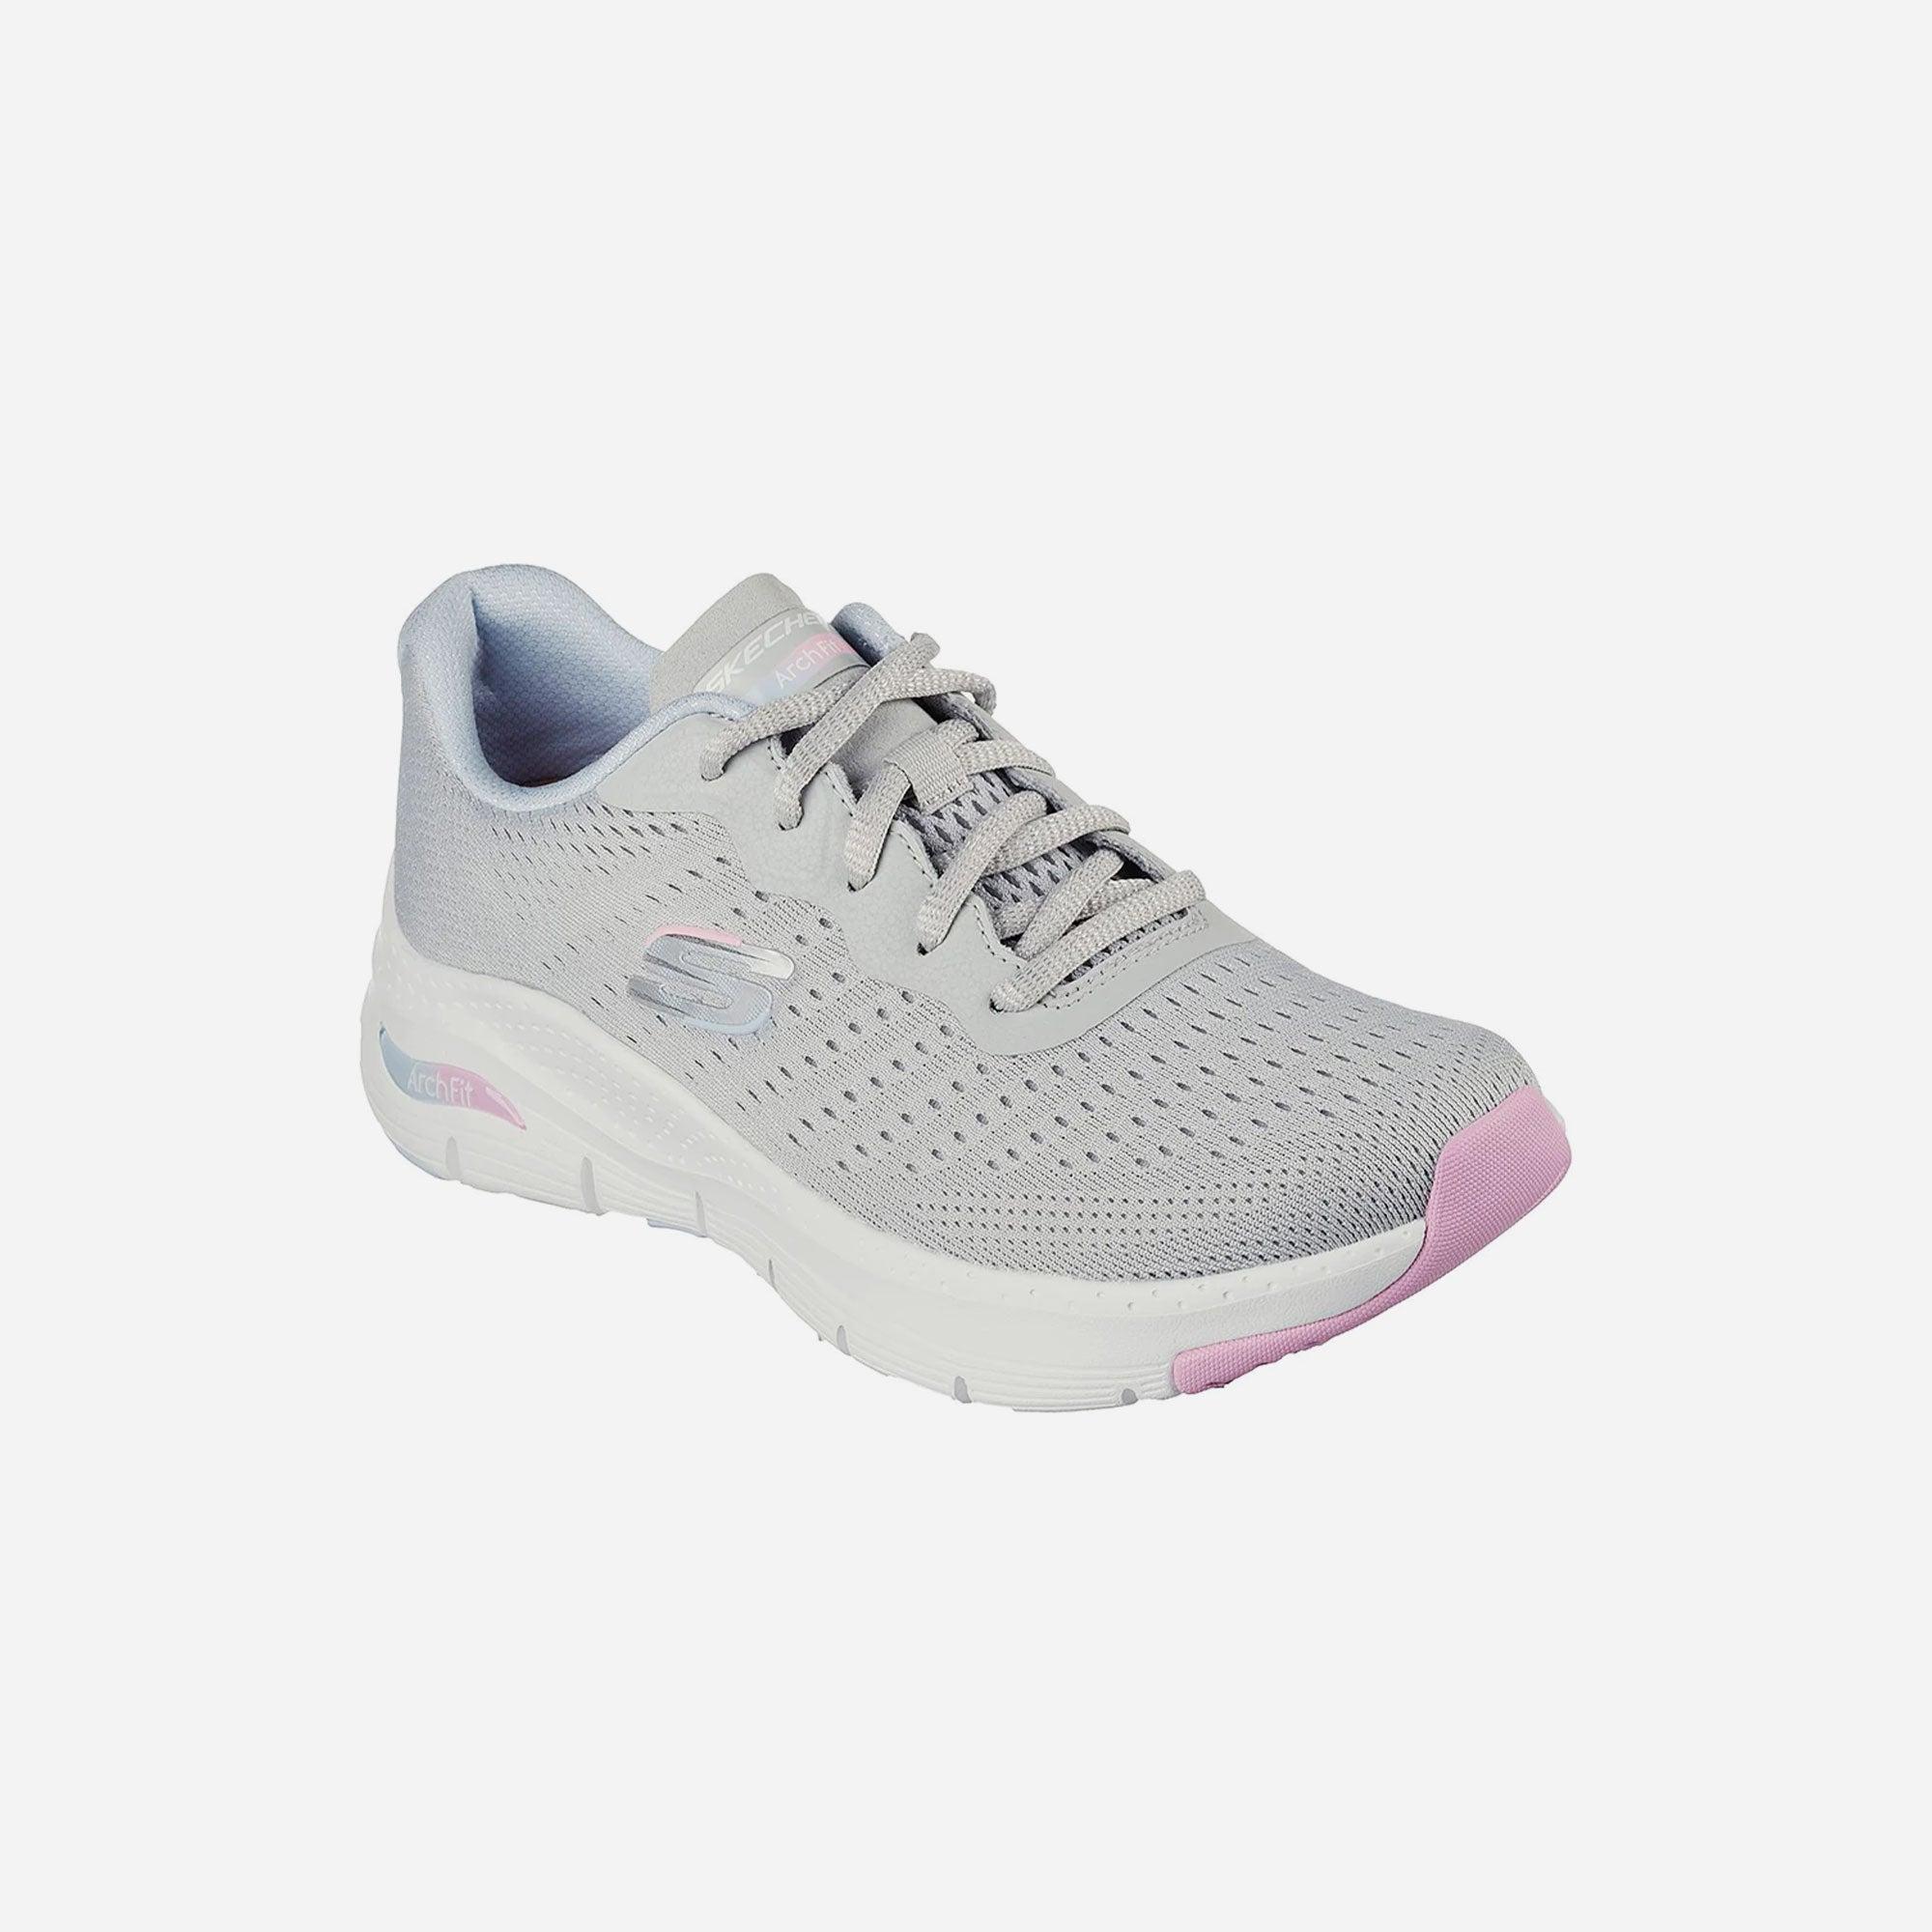 Giày sneakers nữ Skechers Arch Fit - 149722-GYMT